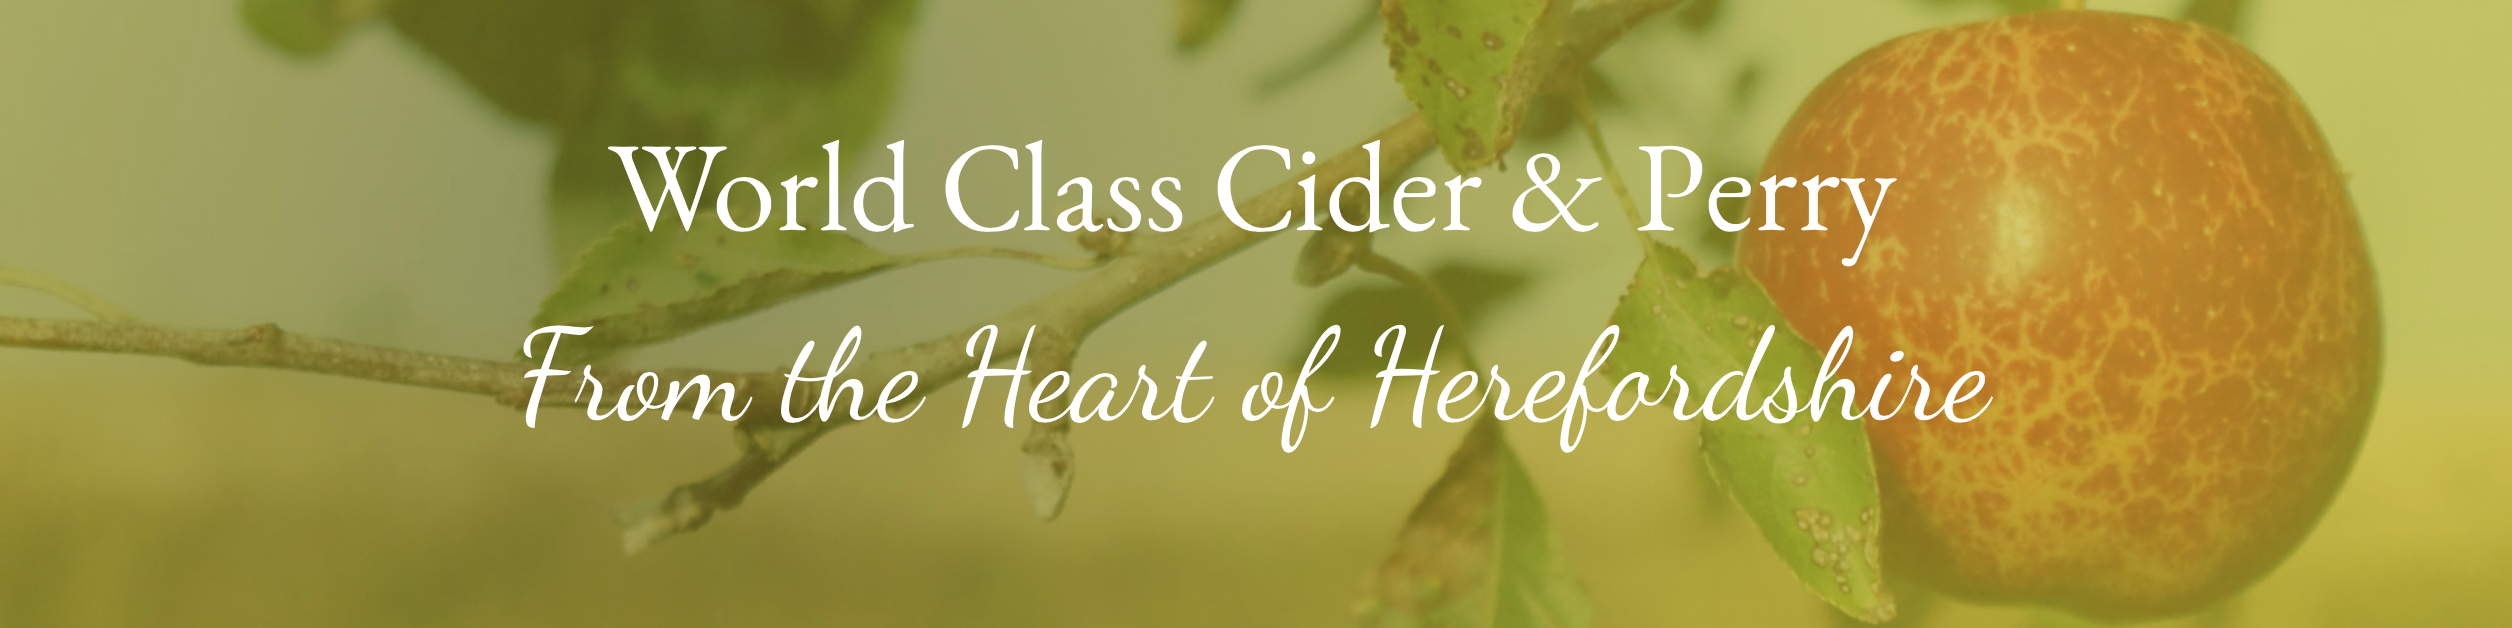 World Class Cider & Perry